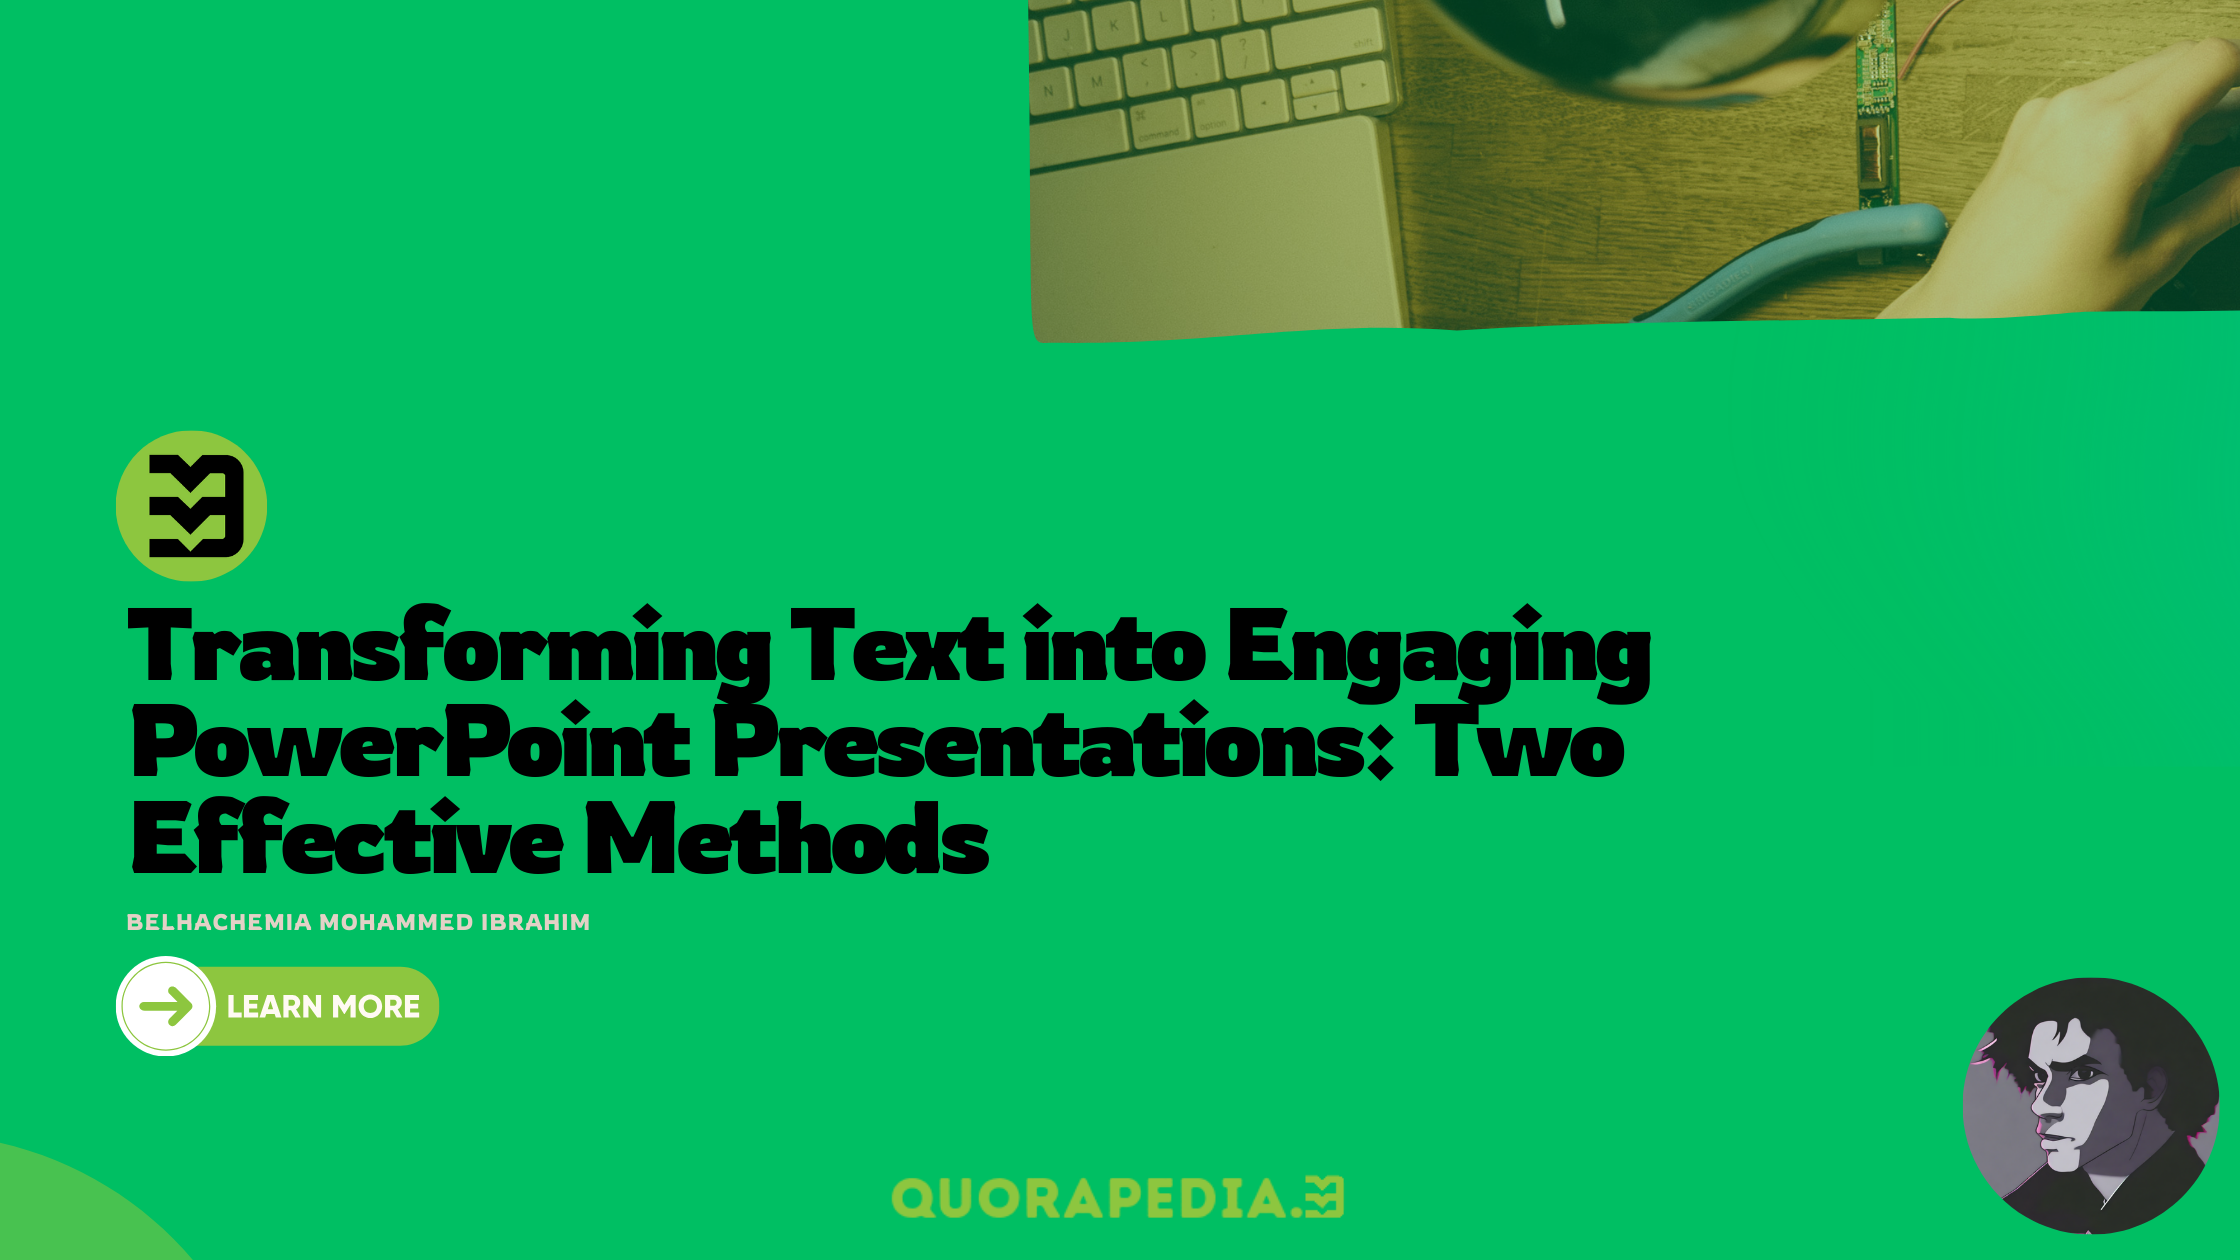 Transforming Text into Engaging PowerPoint Presentations: Two Effective Methods